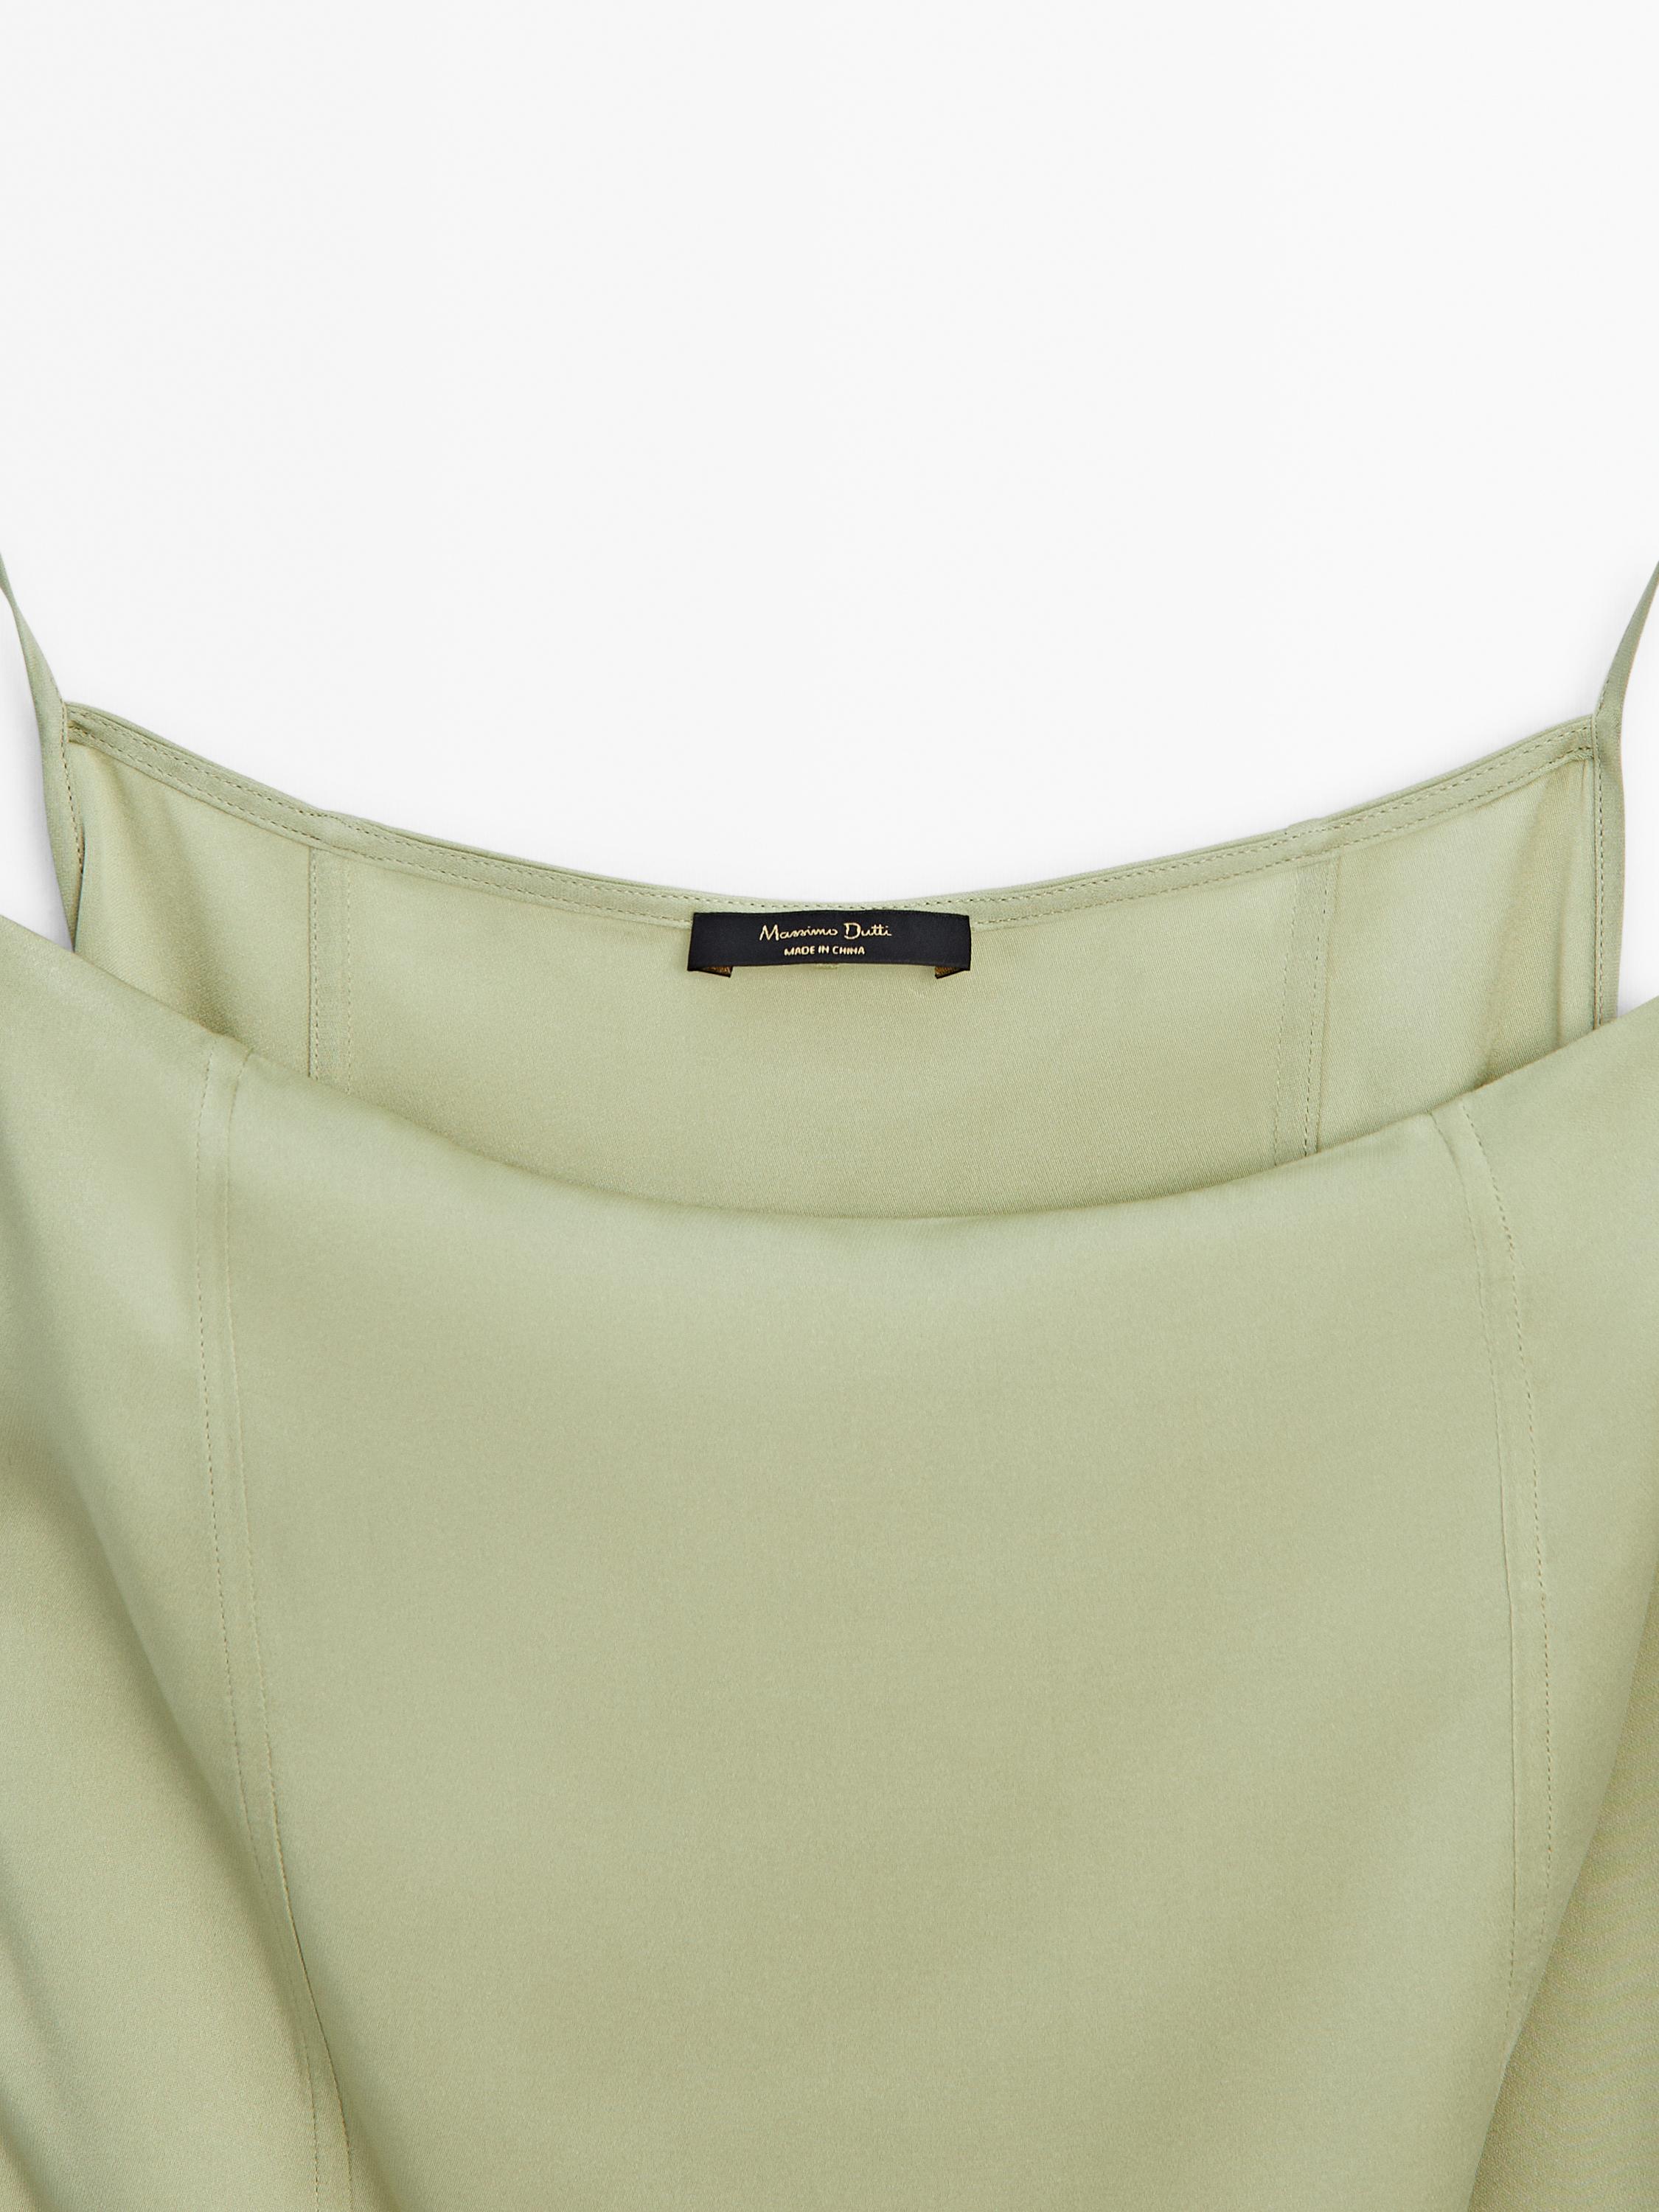 Camisole top with tie detail - Lime green | ZARA United States